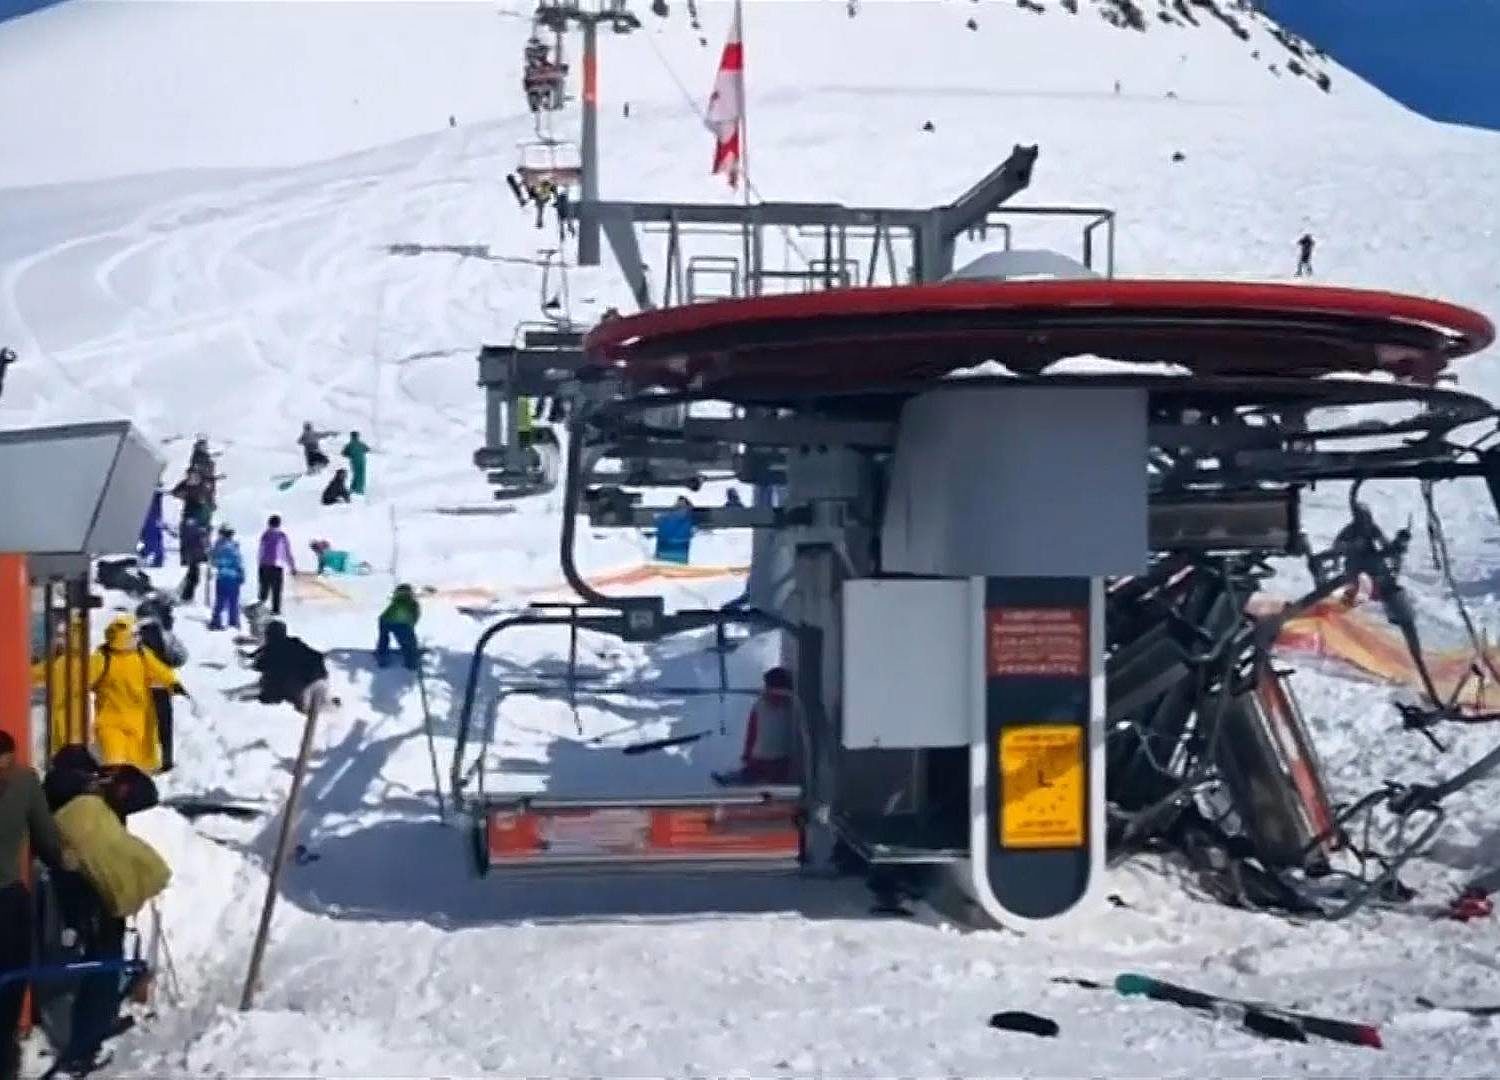 Shocking video of ski lift spinning out of control in Georgia, at least 8 injured